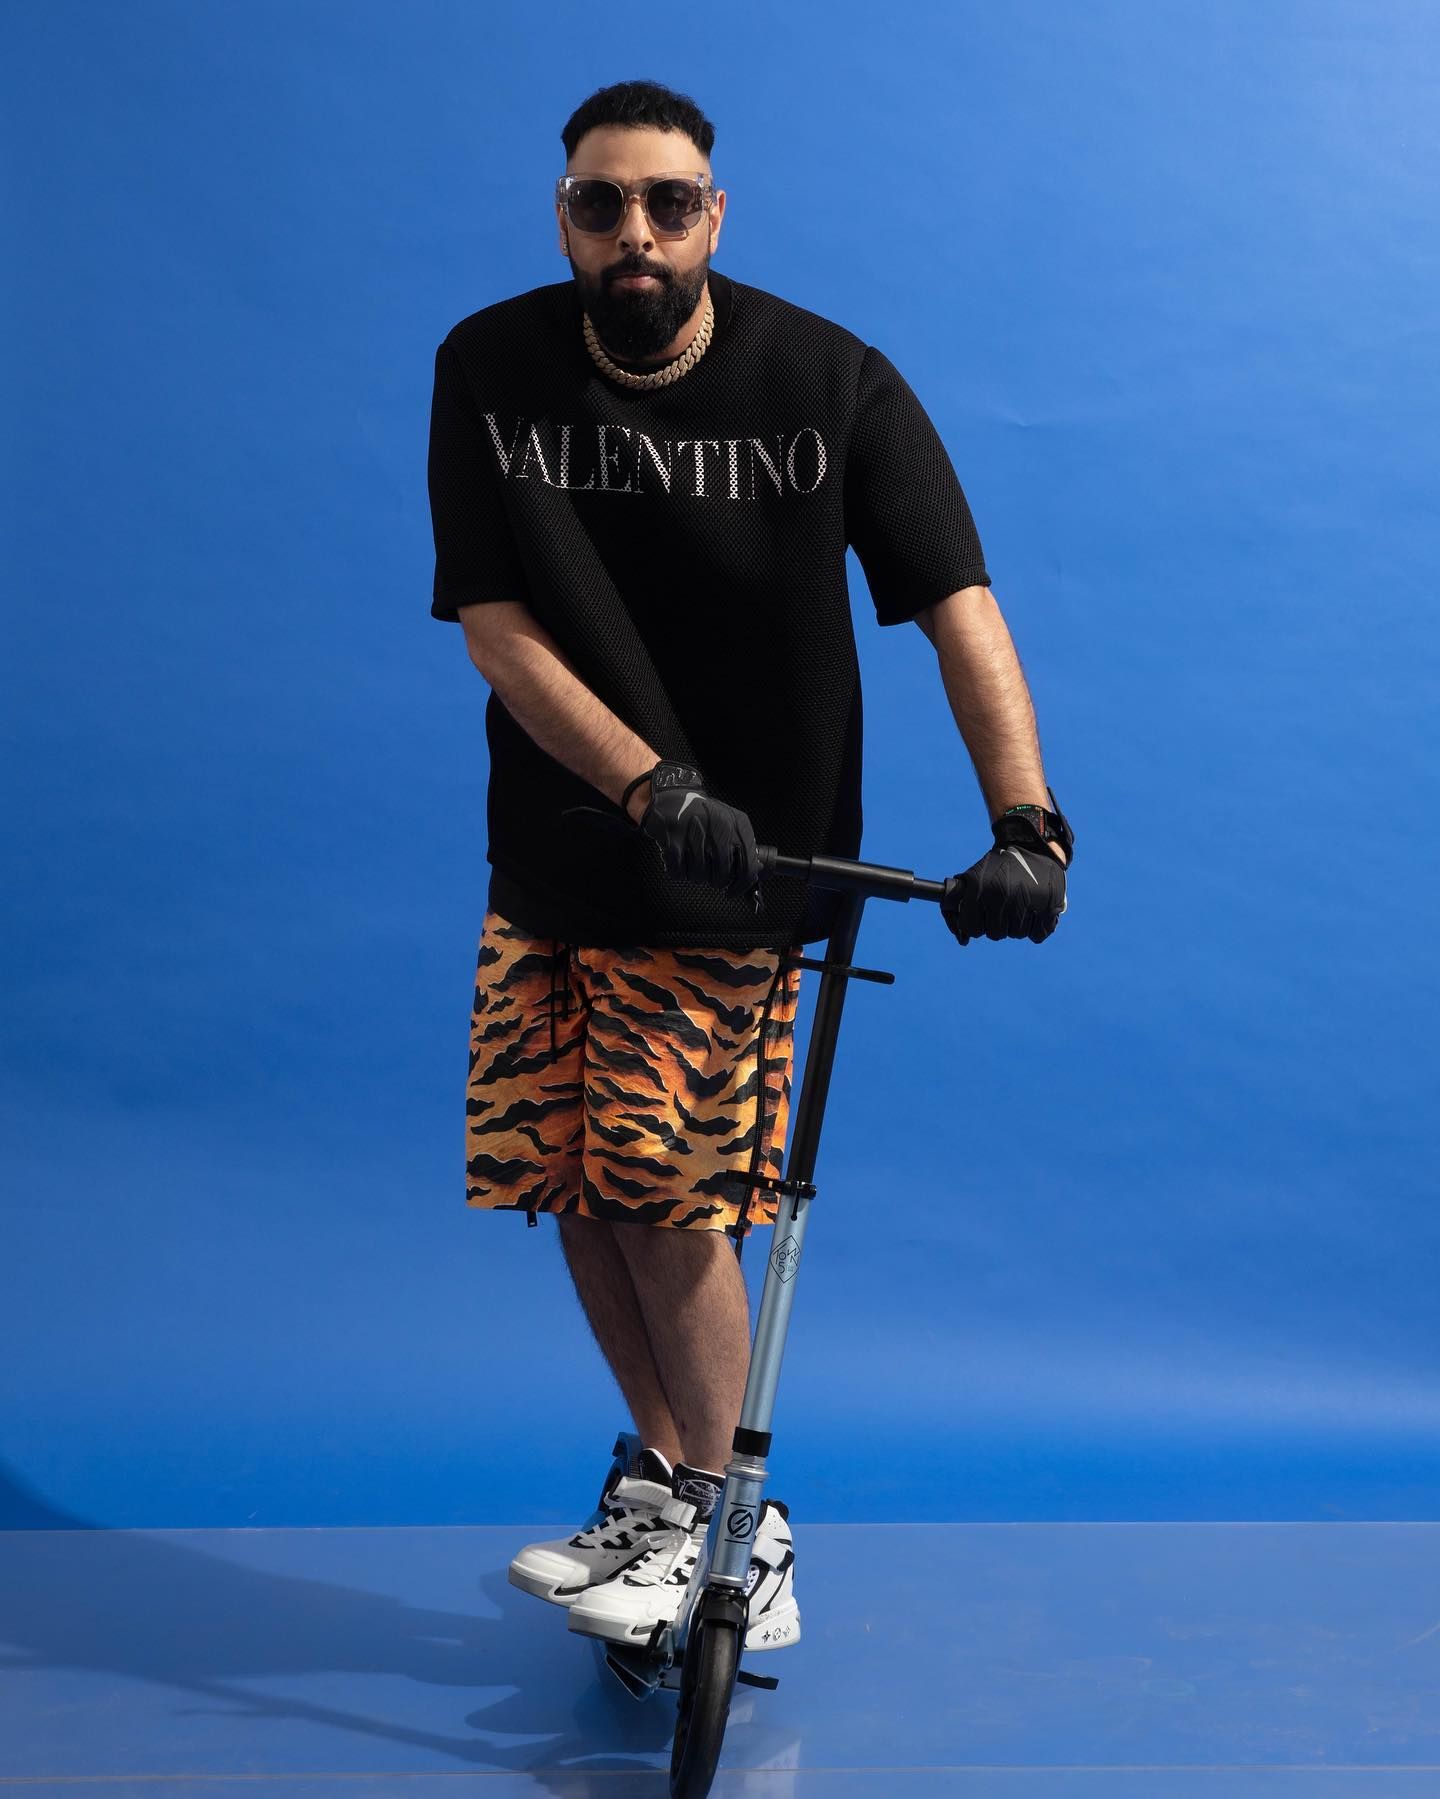 Badshah Gets Real About His Passion And The Man Beyond His Larger